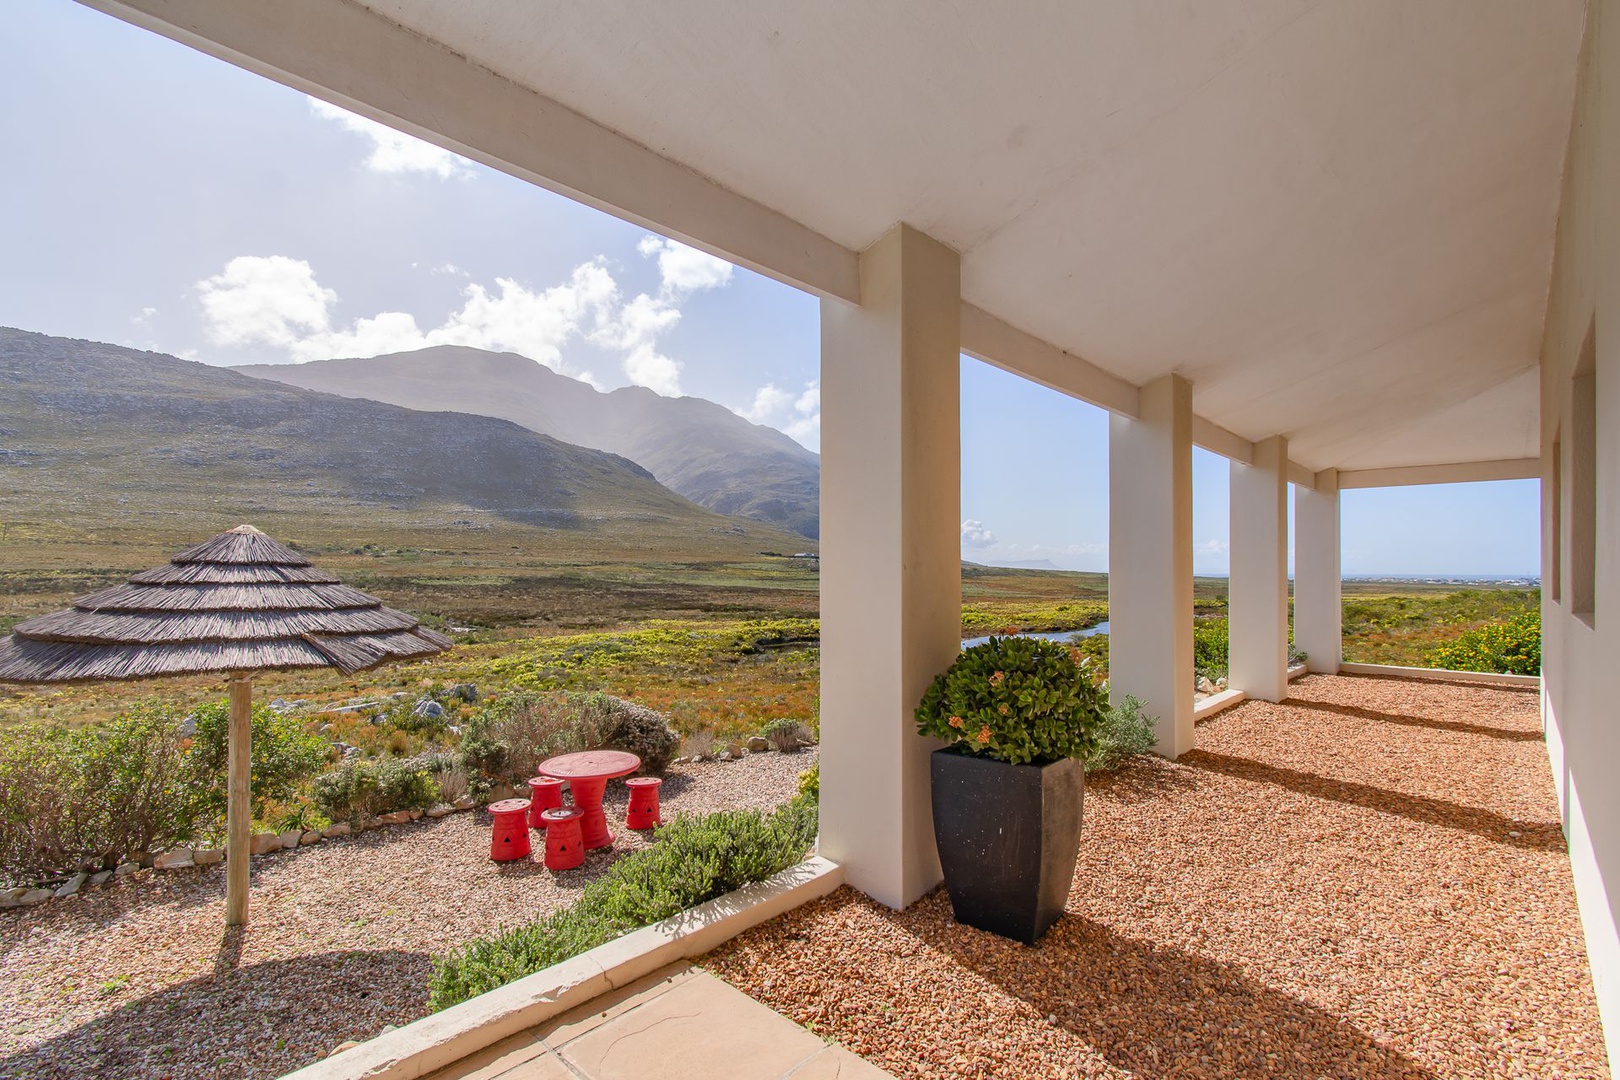 House in Pringle Bay Rural - Fynbos and mountains as far as the eye can see.